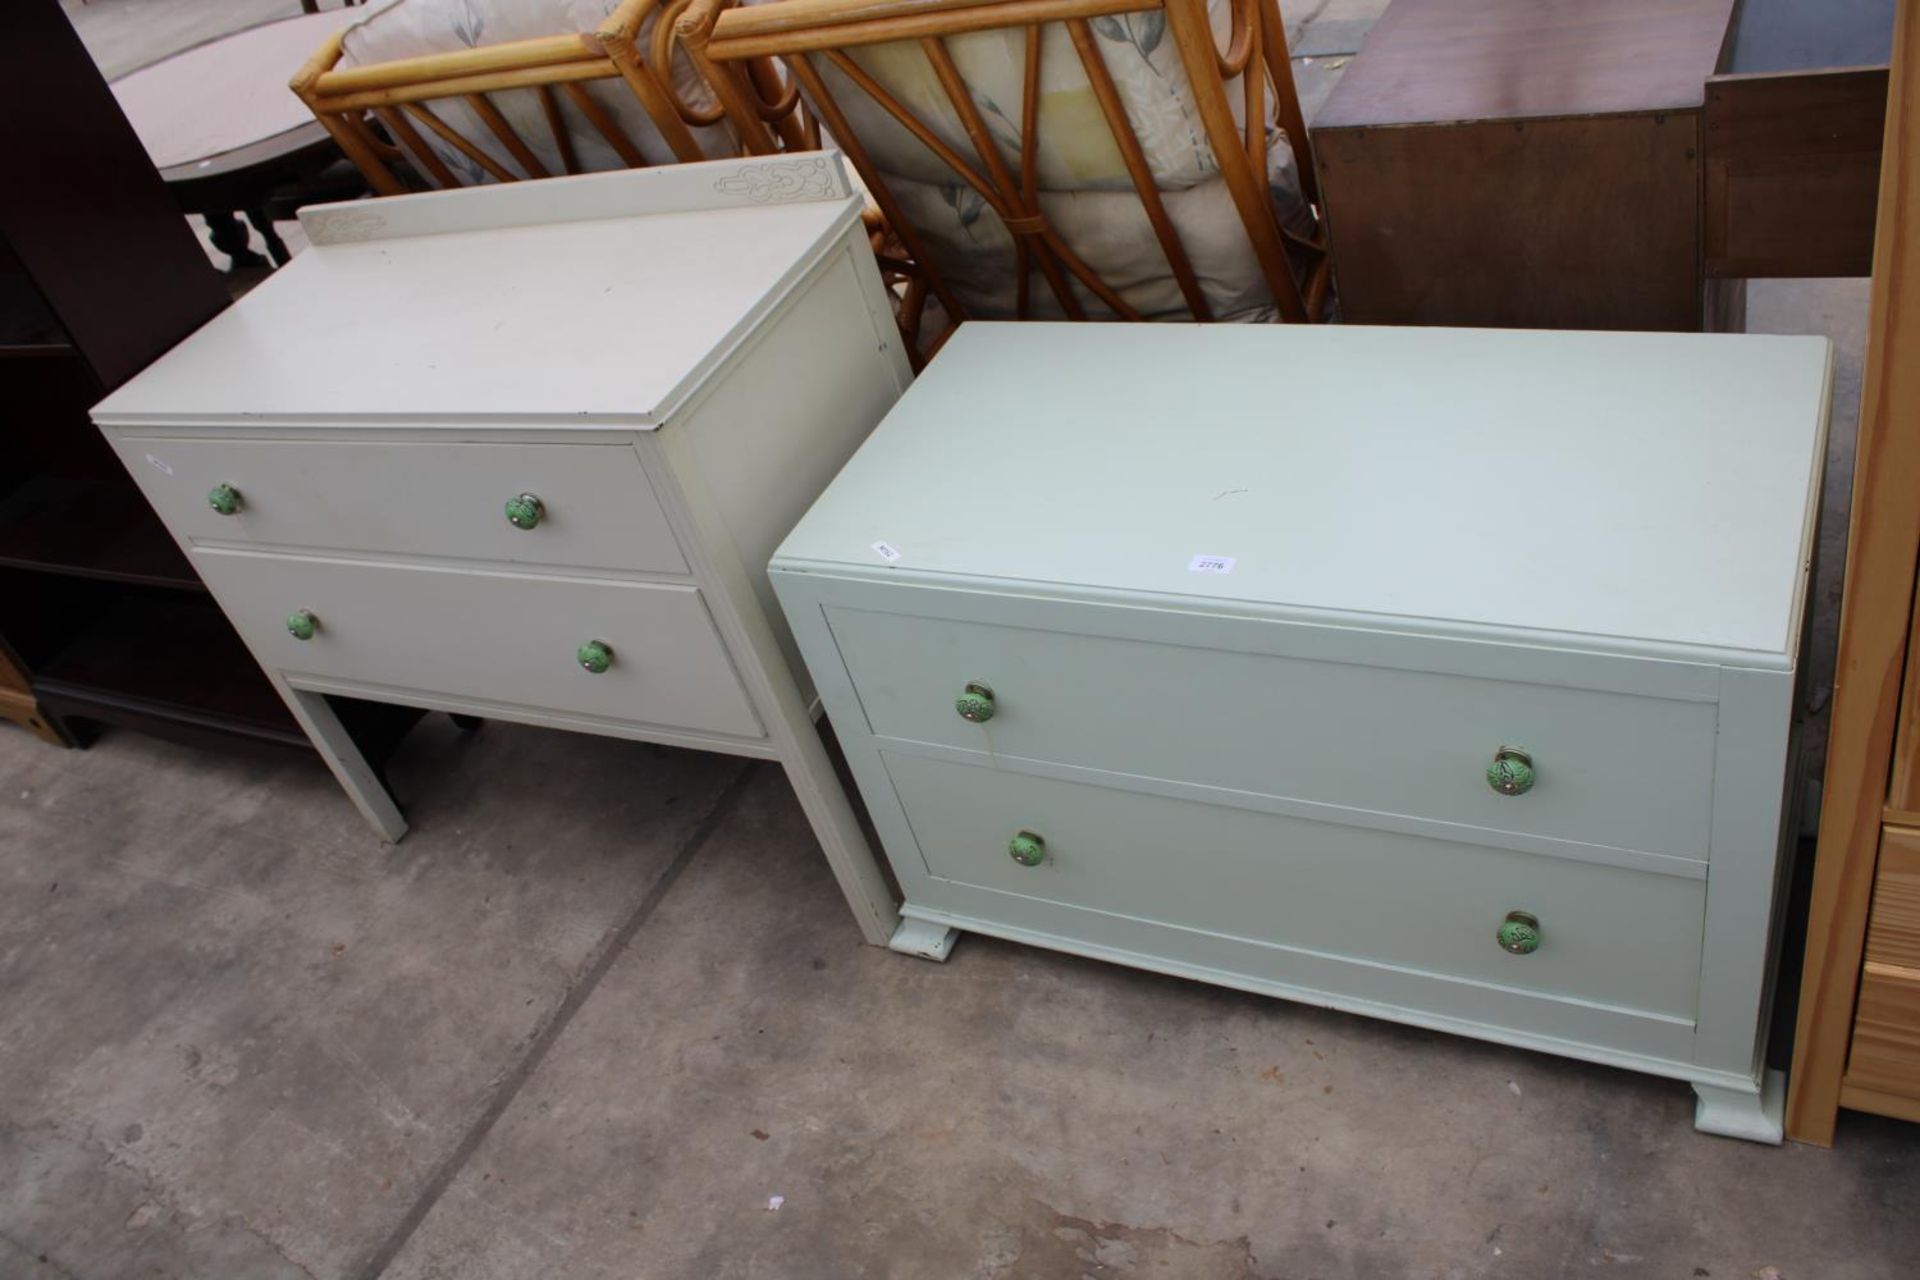 TWO MID 20TH CENTURY PAINTED CHESTS OF DRAWERS WITH MATCHING KNOBS, 36" WID EACH